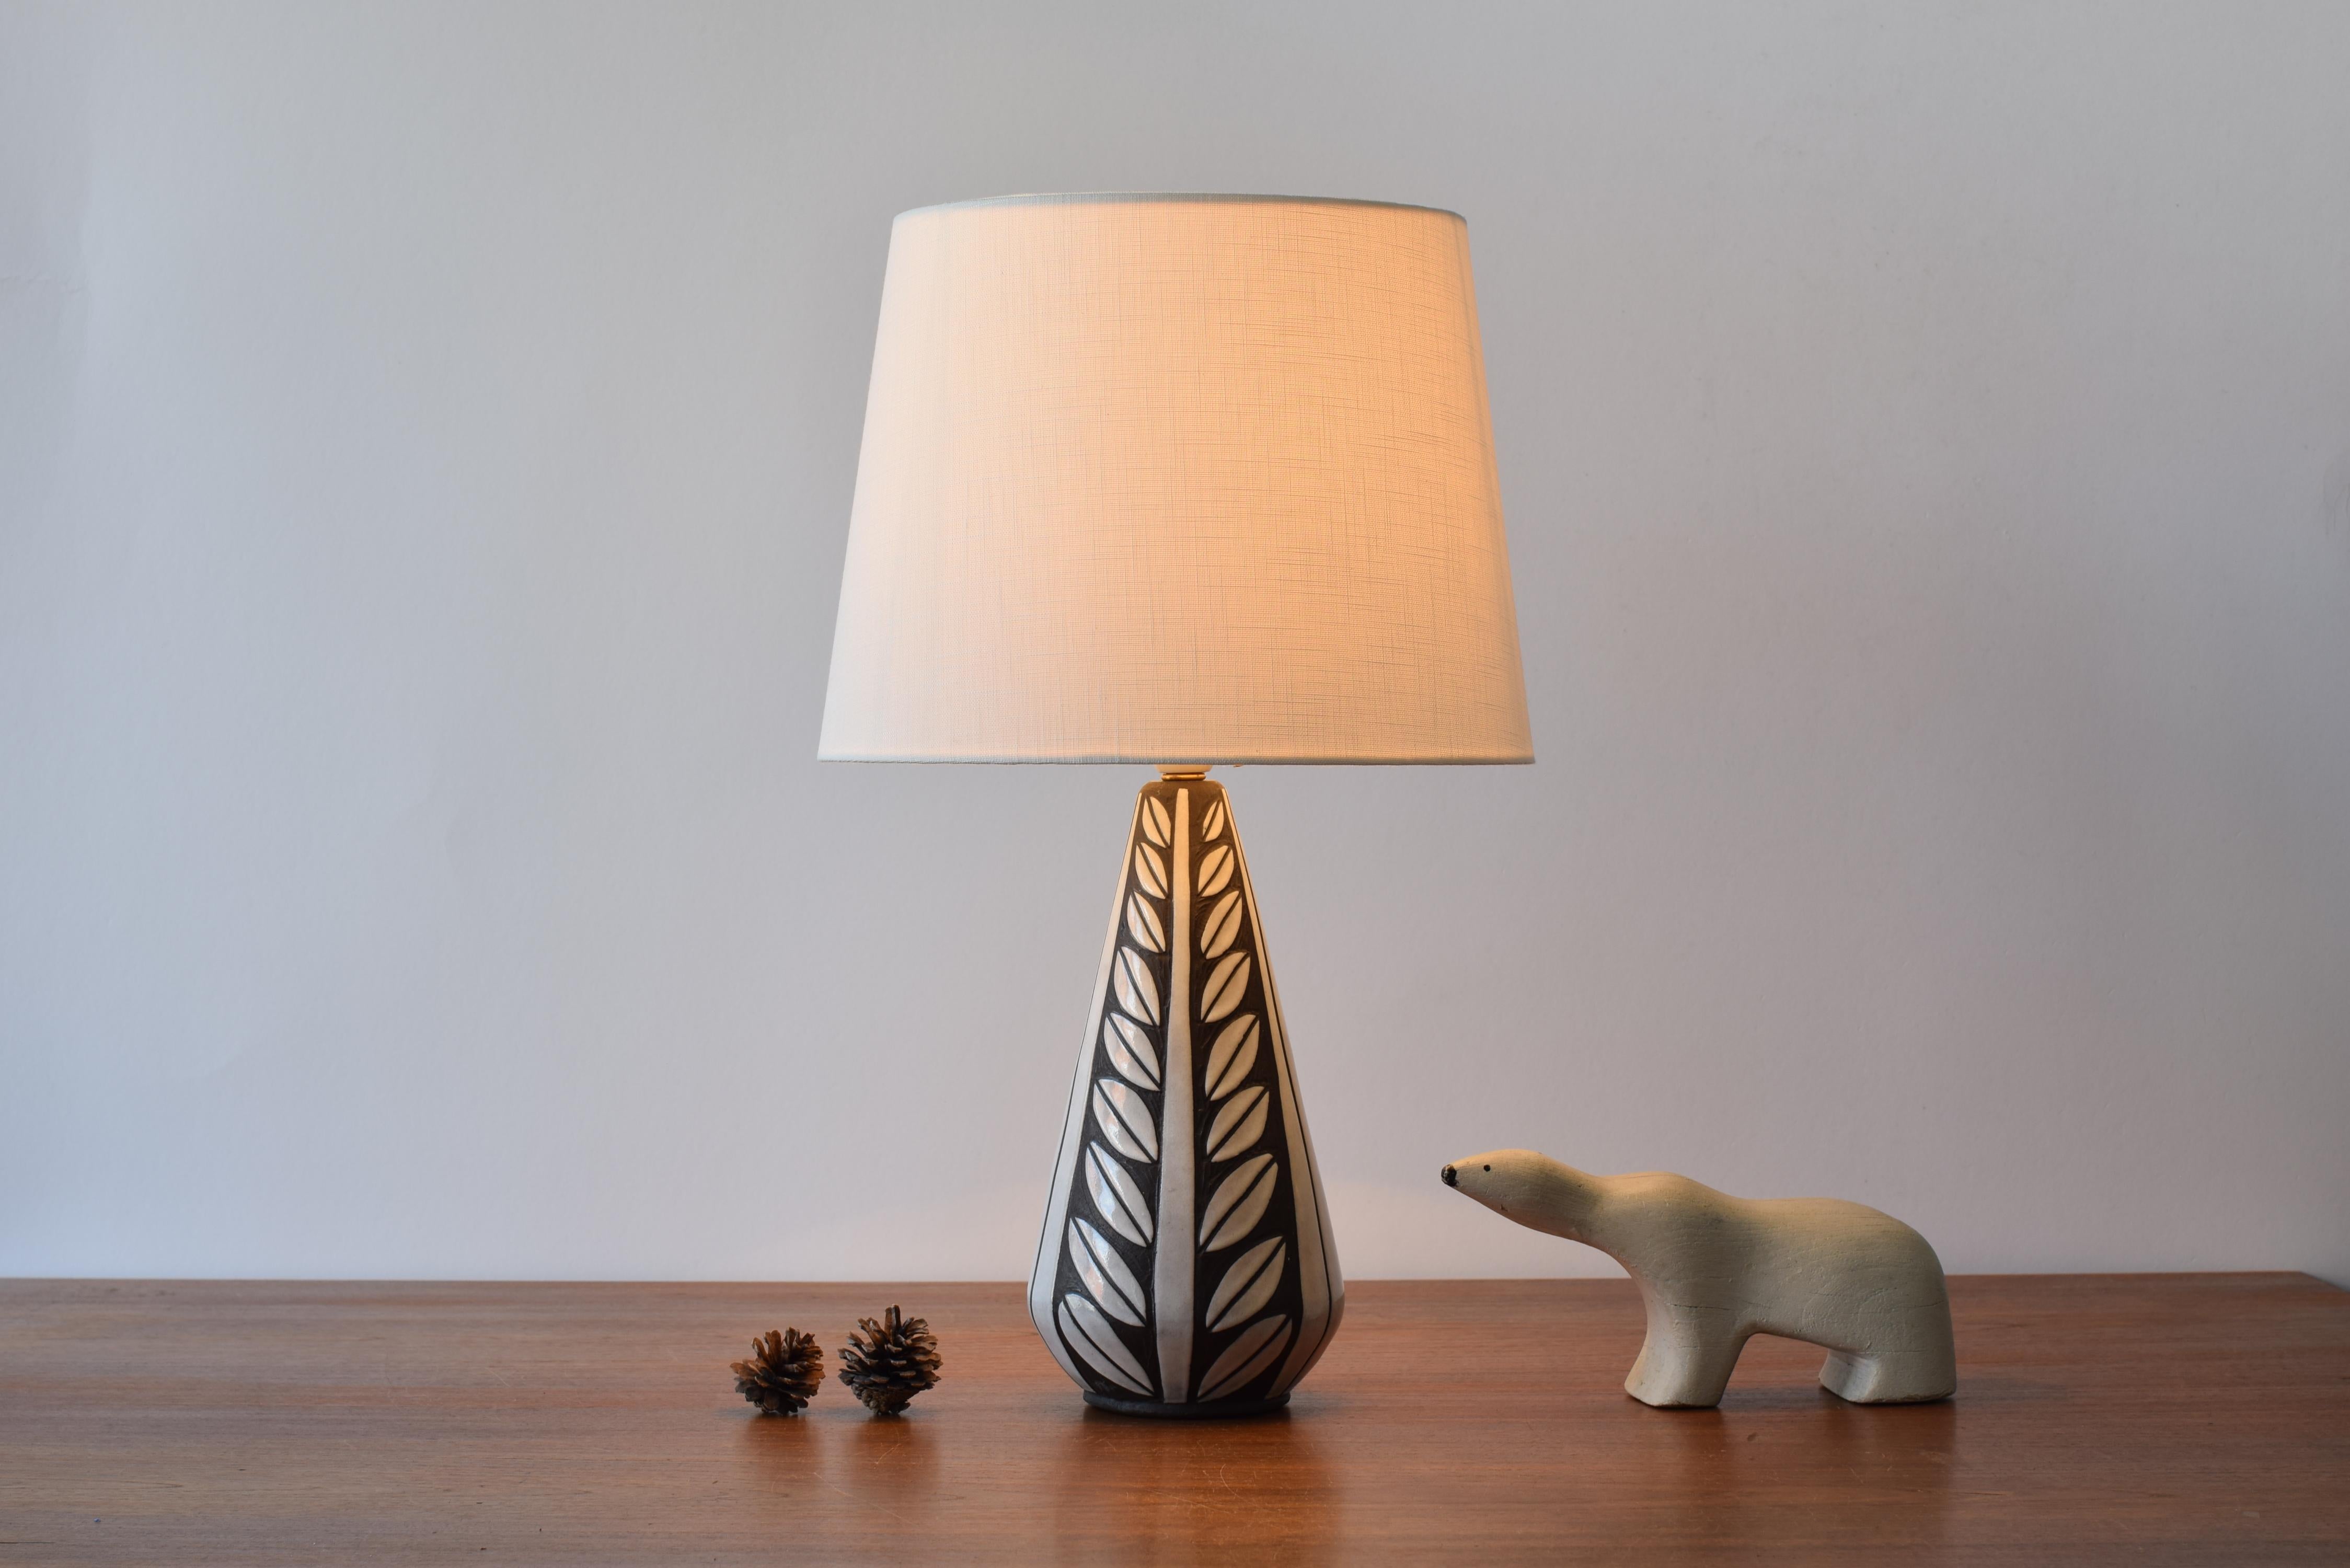 Danish midcentury ceramic table lamp designed by Marianne Starck for Michael Andersen & Søn (MA&S).
The lamp belongs to the Negro series - also called Tribal series - and shows a stylized leaf decor in sgraffito technique with white glaze